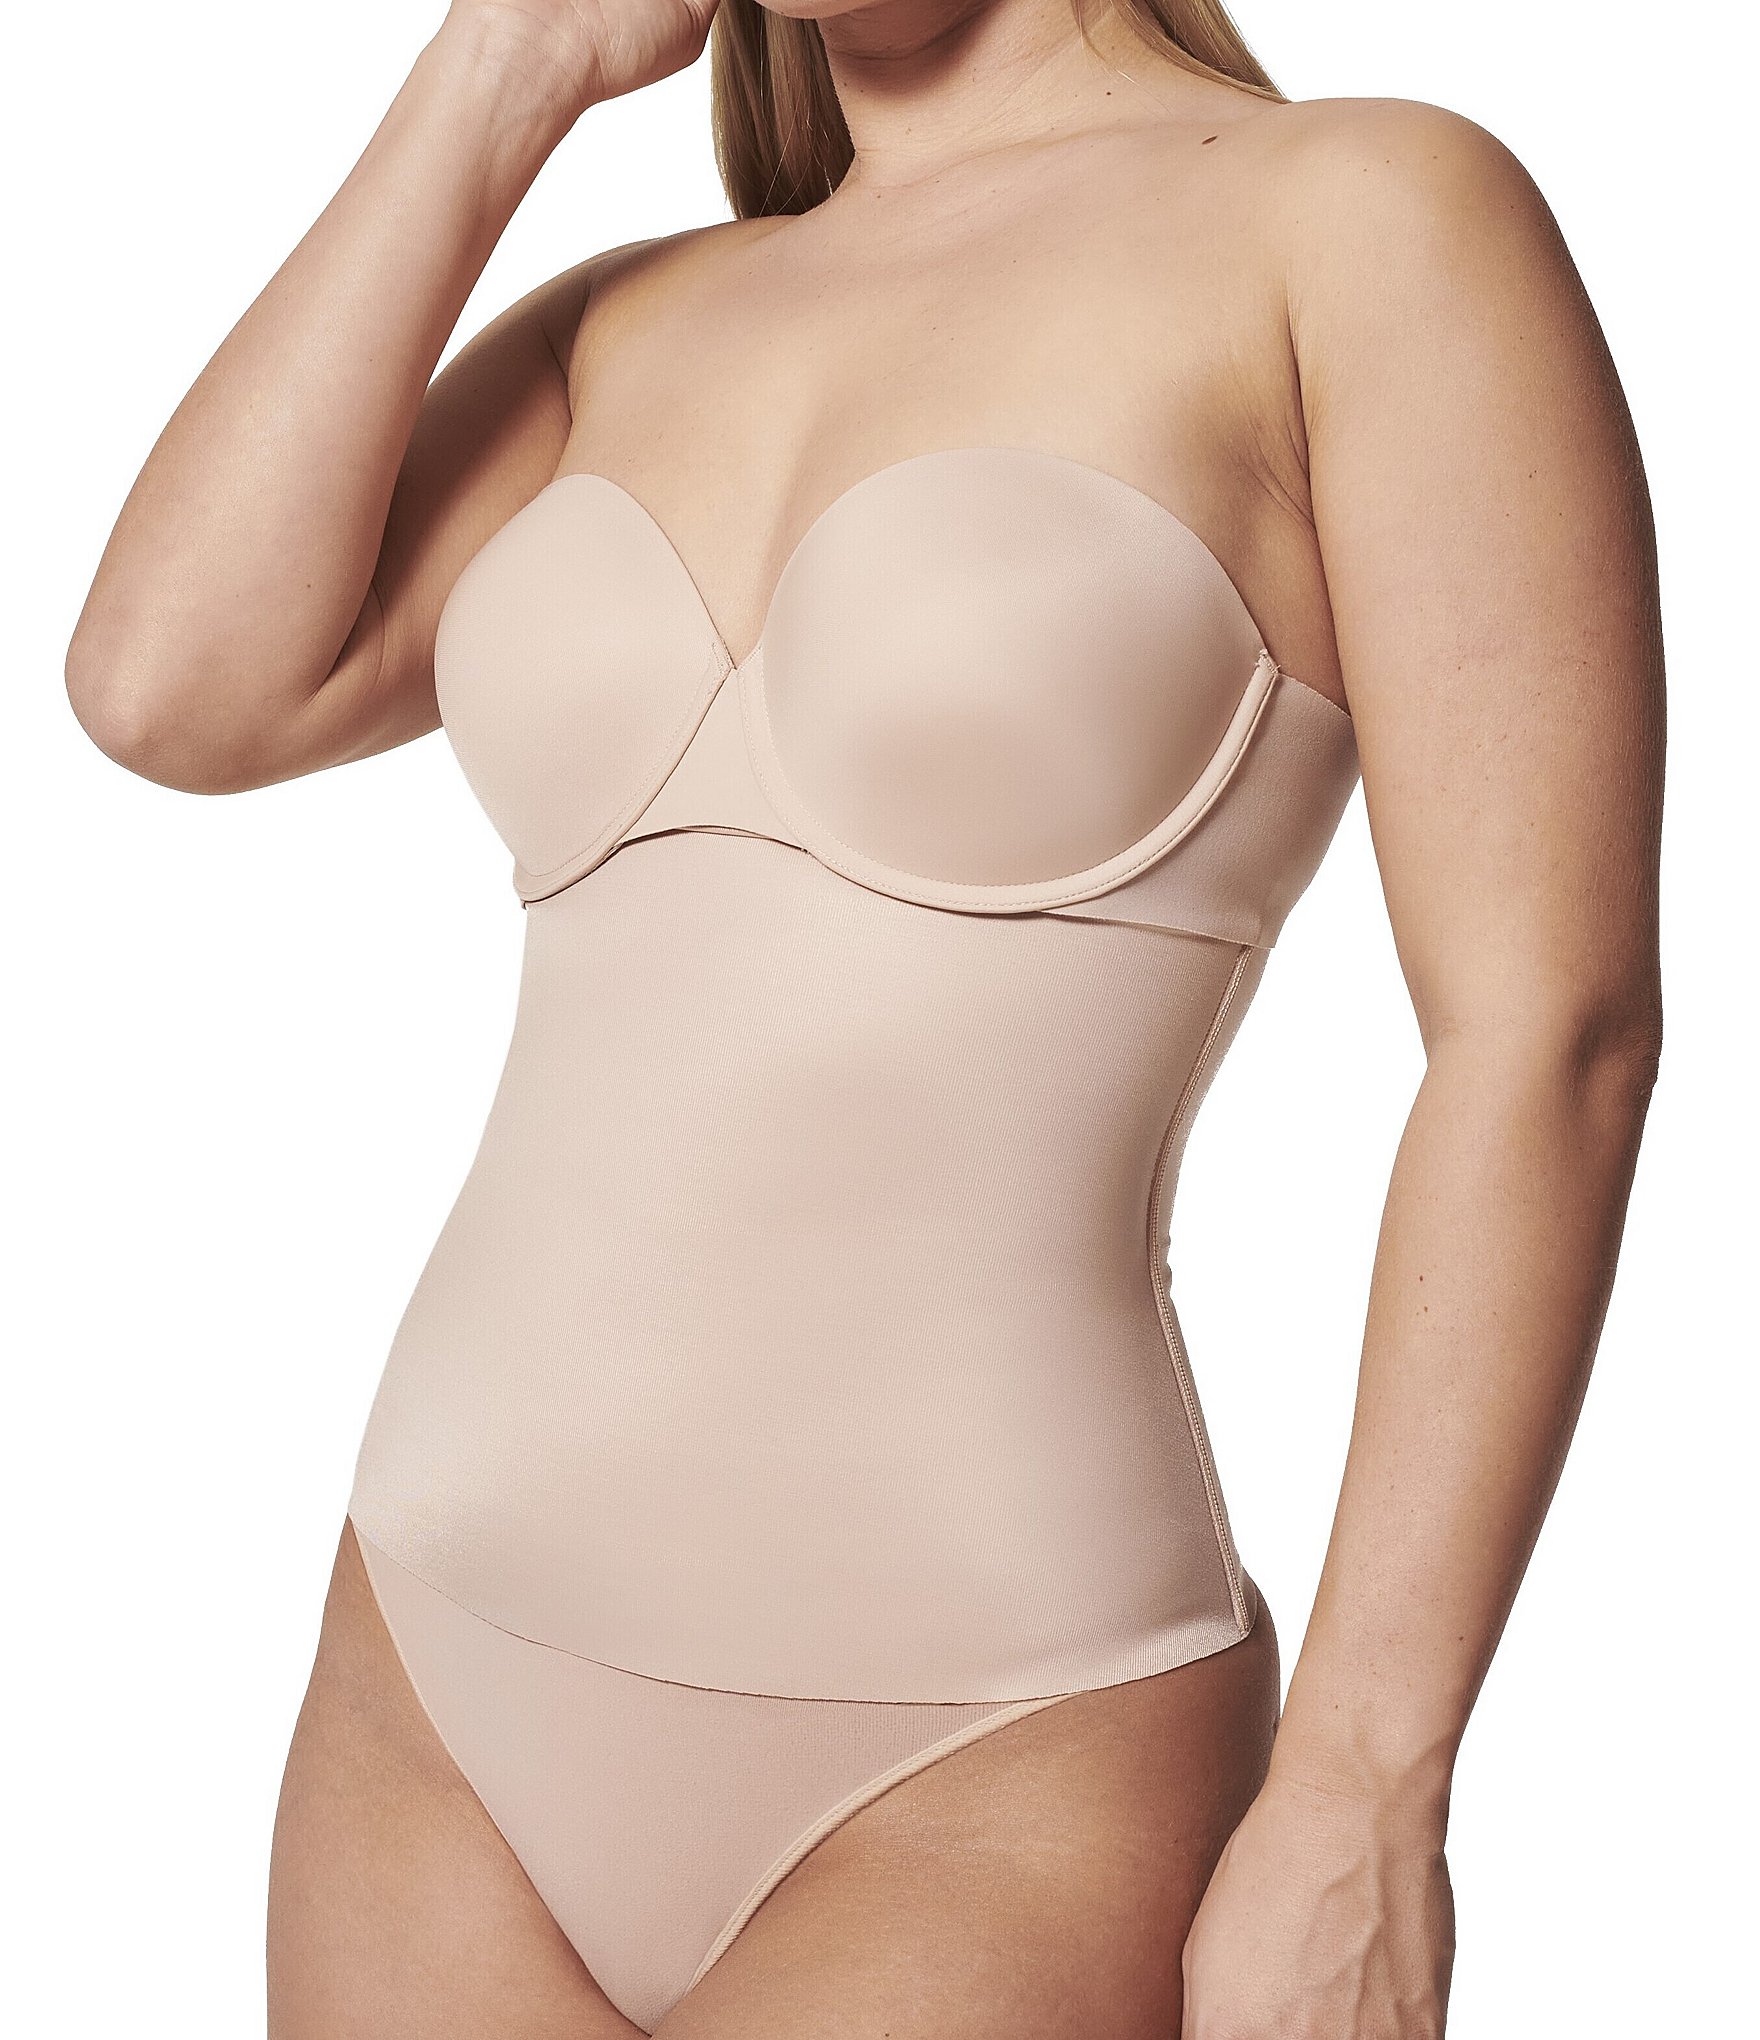 Spanx Sports Full Body Corset Shapewear: Wholesale Latex Waist Cincher For  Women, Plus Size Training And Slimming Body Shaper From Tuhua, $40.55